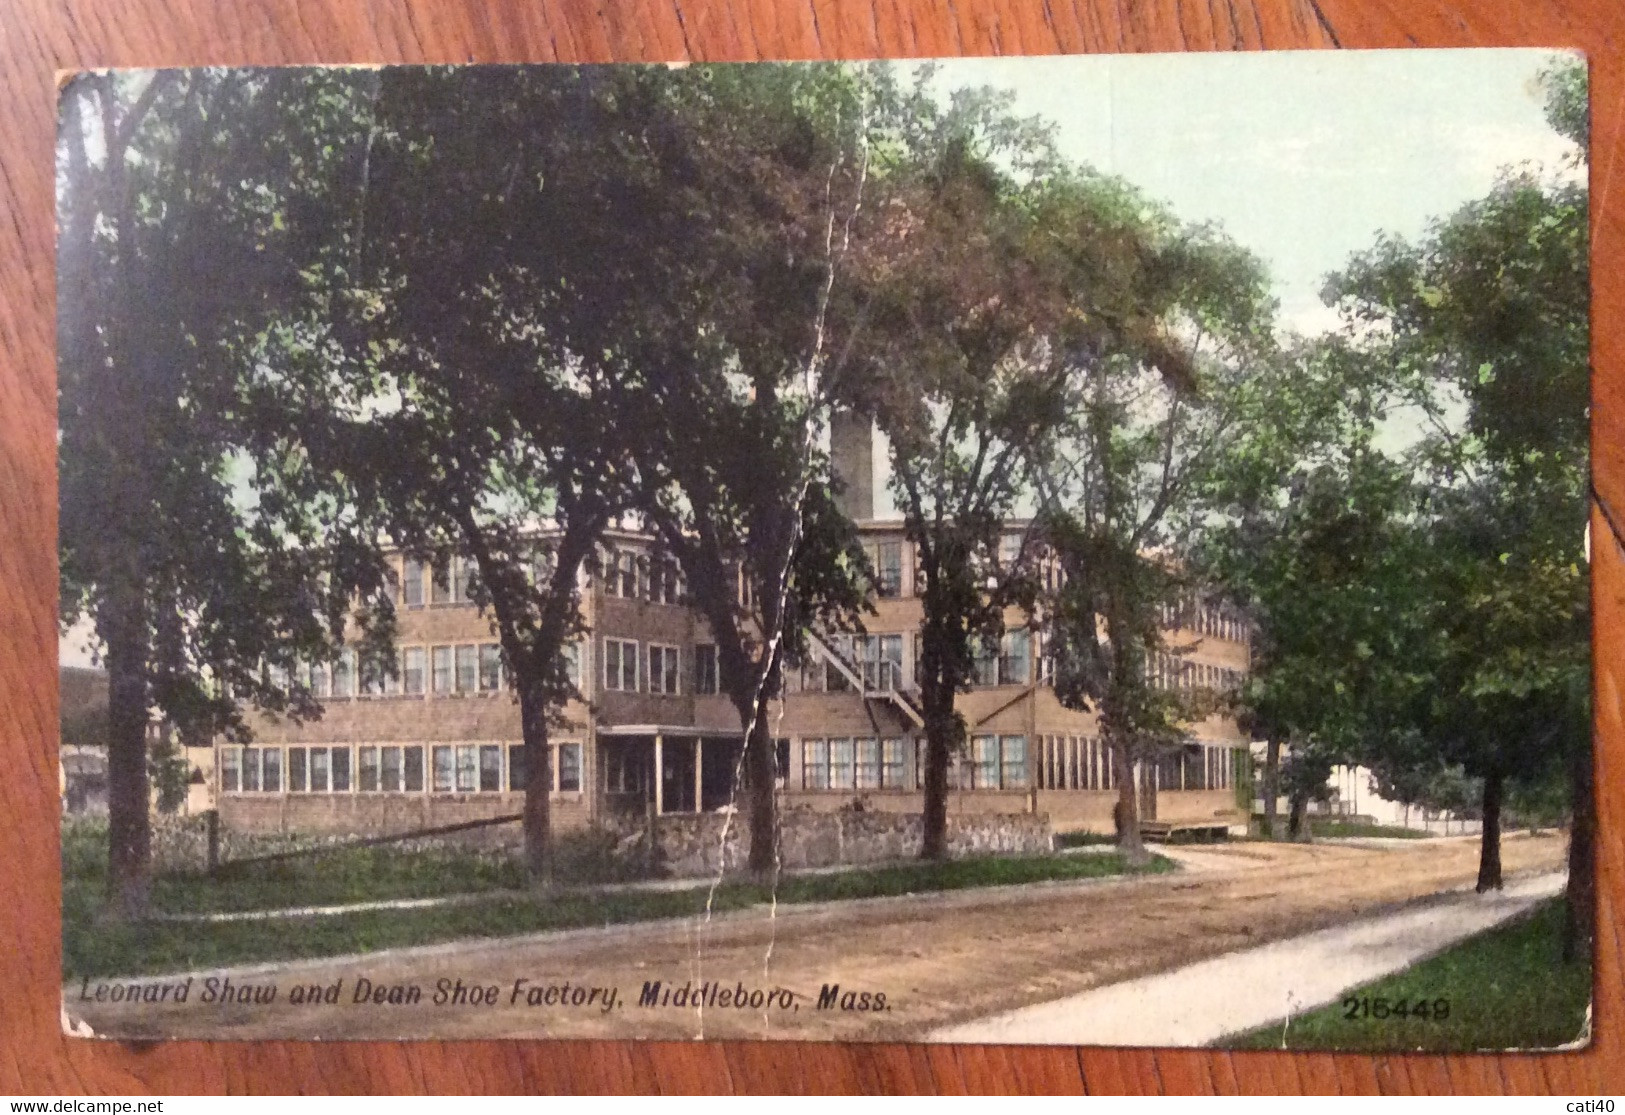 USA -  MIDDLEBORO LEONARD SHAW AND DEAN SHOE FACTORY  - VINTAGE POST CARD   1914 - Fall River